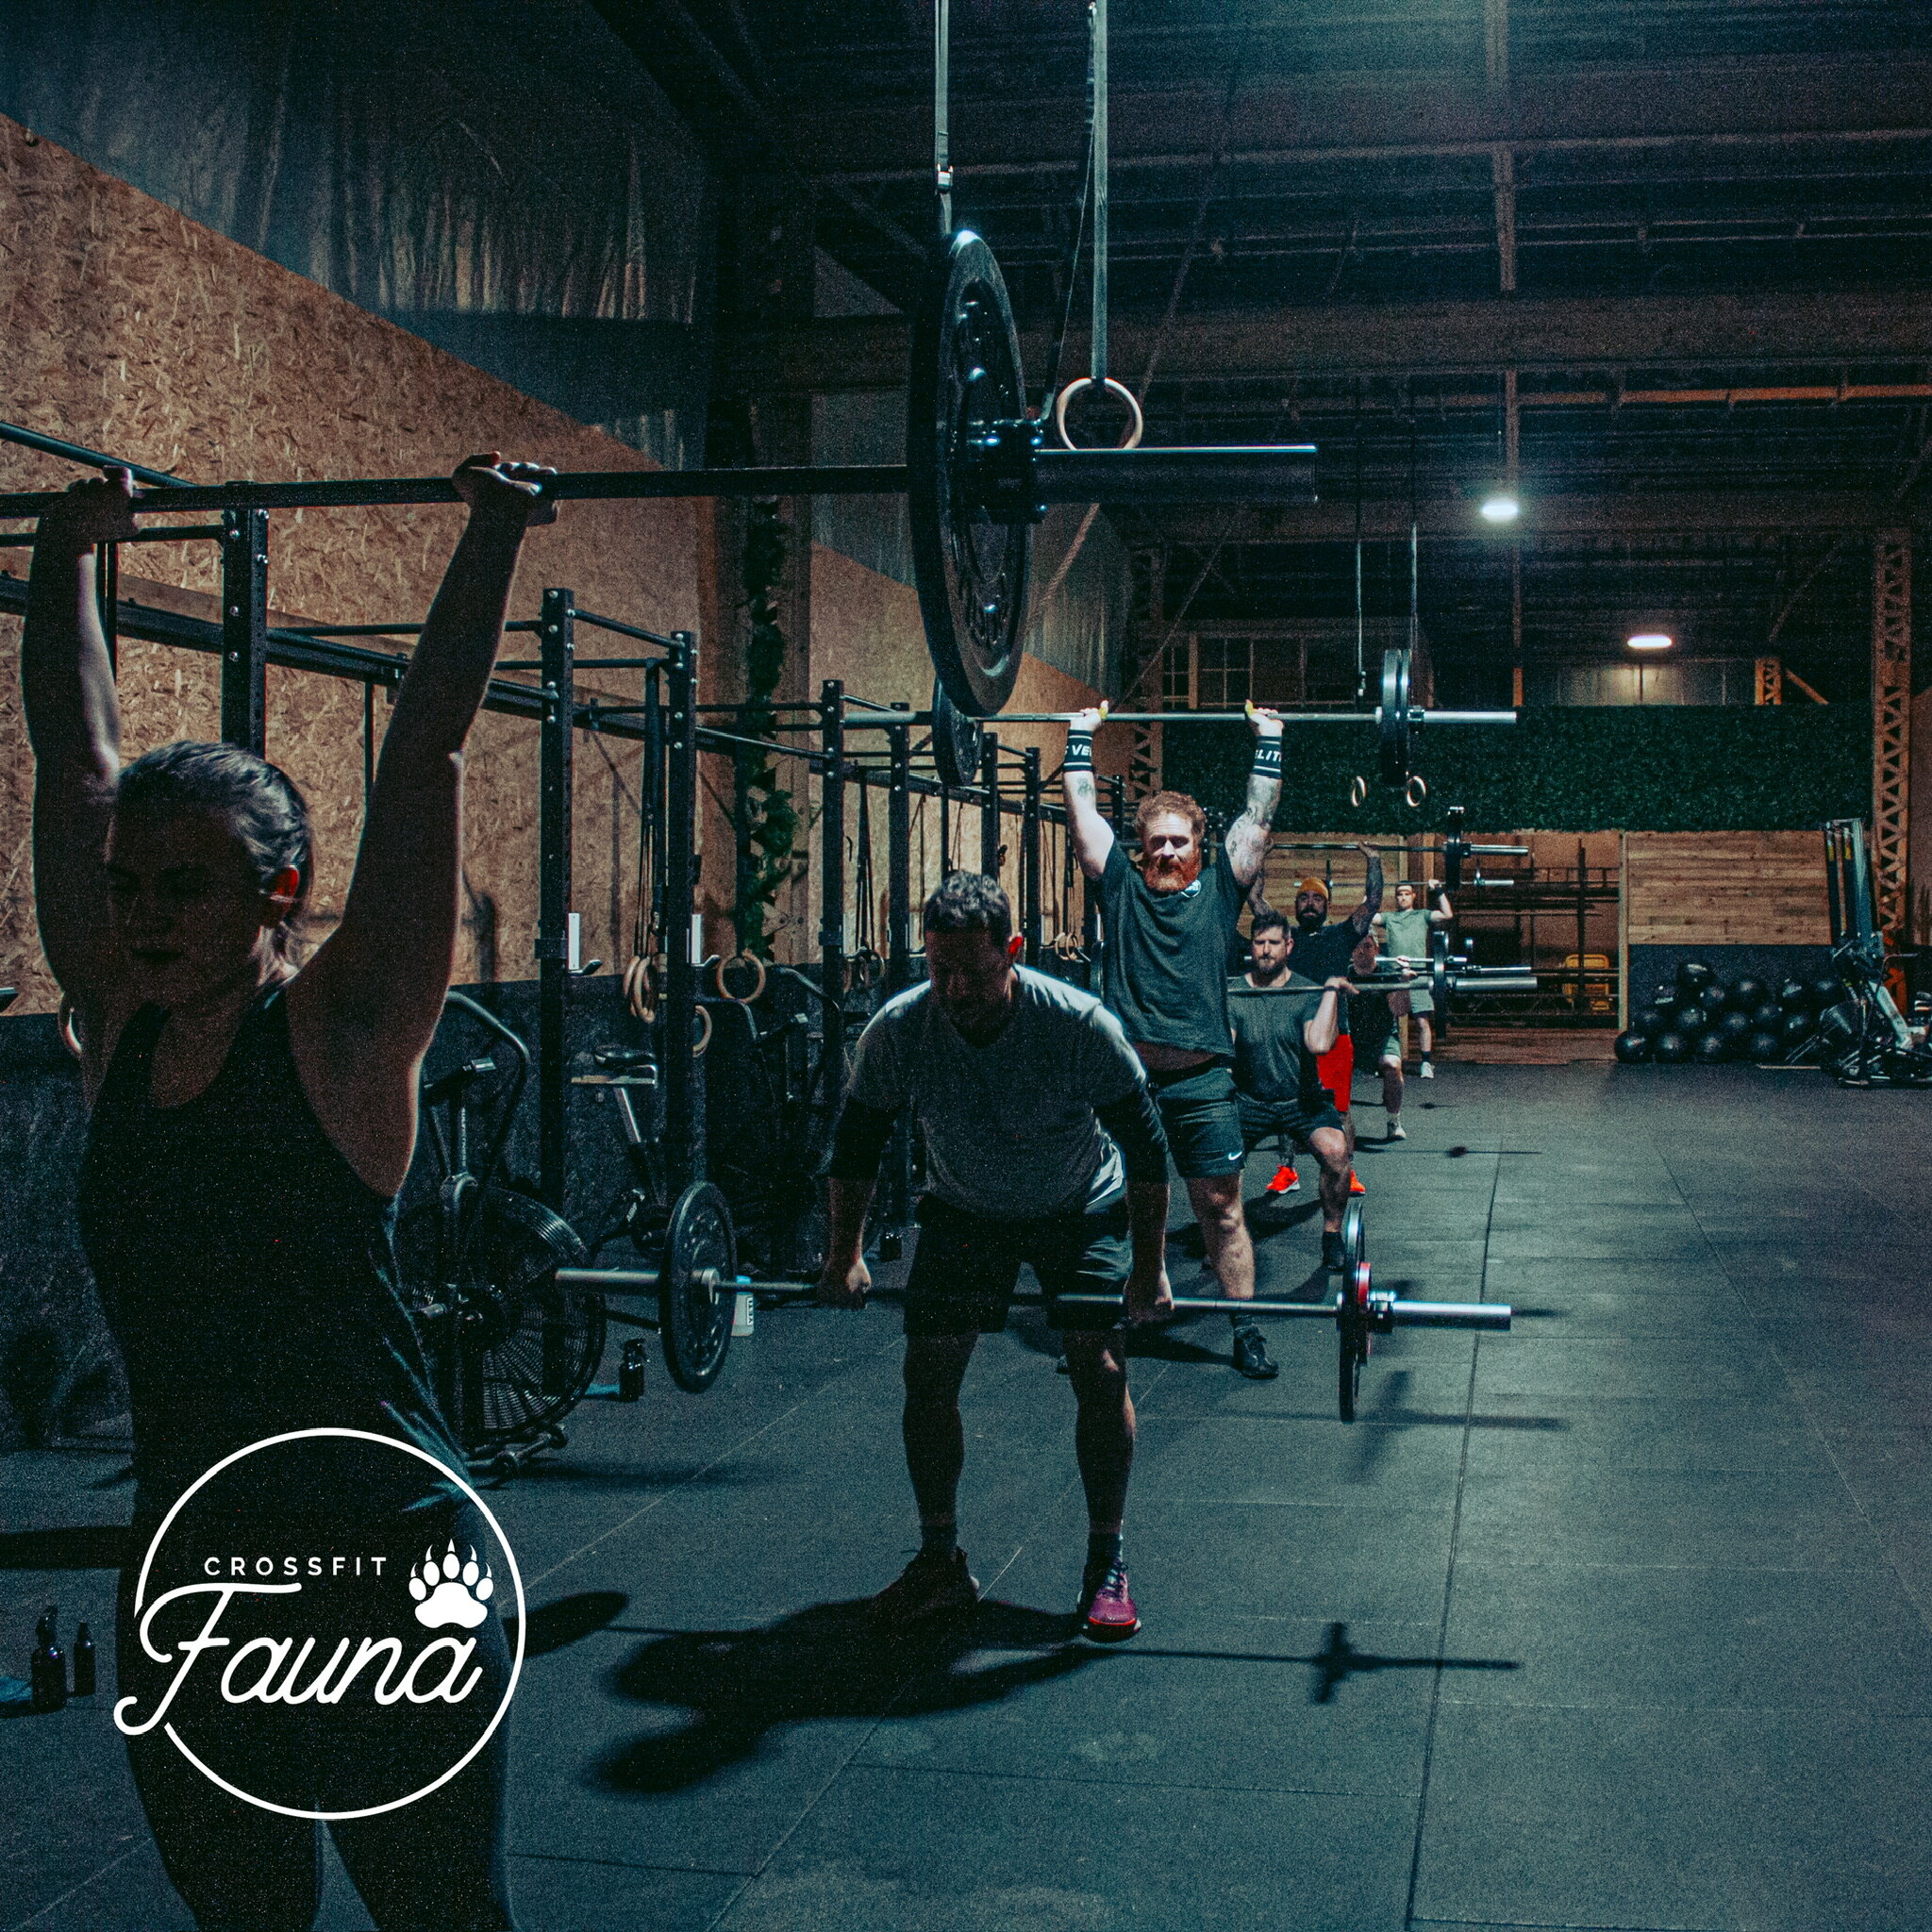 Just over a month ago, we were dusting the rust off our barbells, and now look at them 😍 Being thrown around by our members and getting well and truly comfy in their new space. 

Everything happens for a reason 🙌 Check out our 5:45am class givin' i